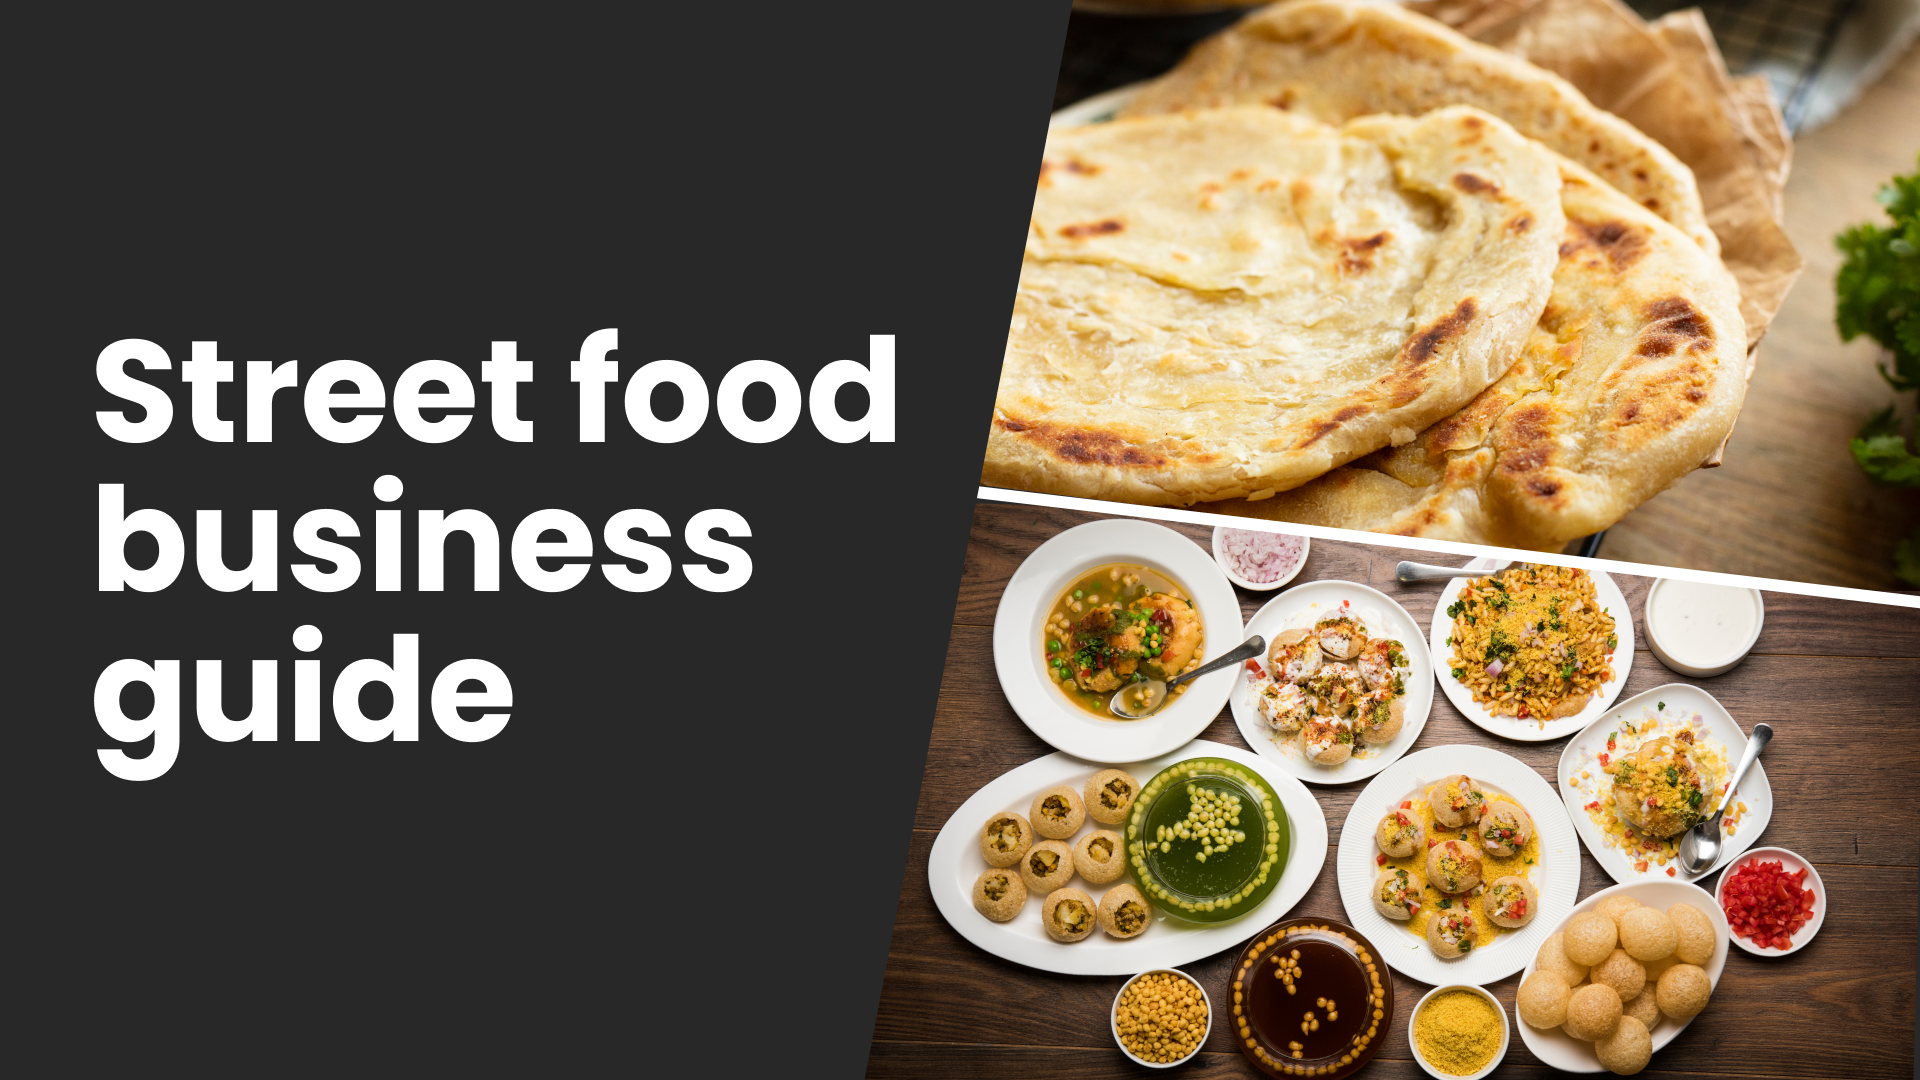 Course Trailer: Paratha and Chaat Center Business: Earn upto 1.5 Lakh/Month. Watch to know more.